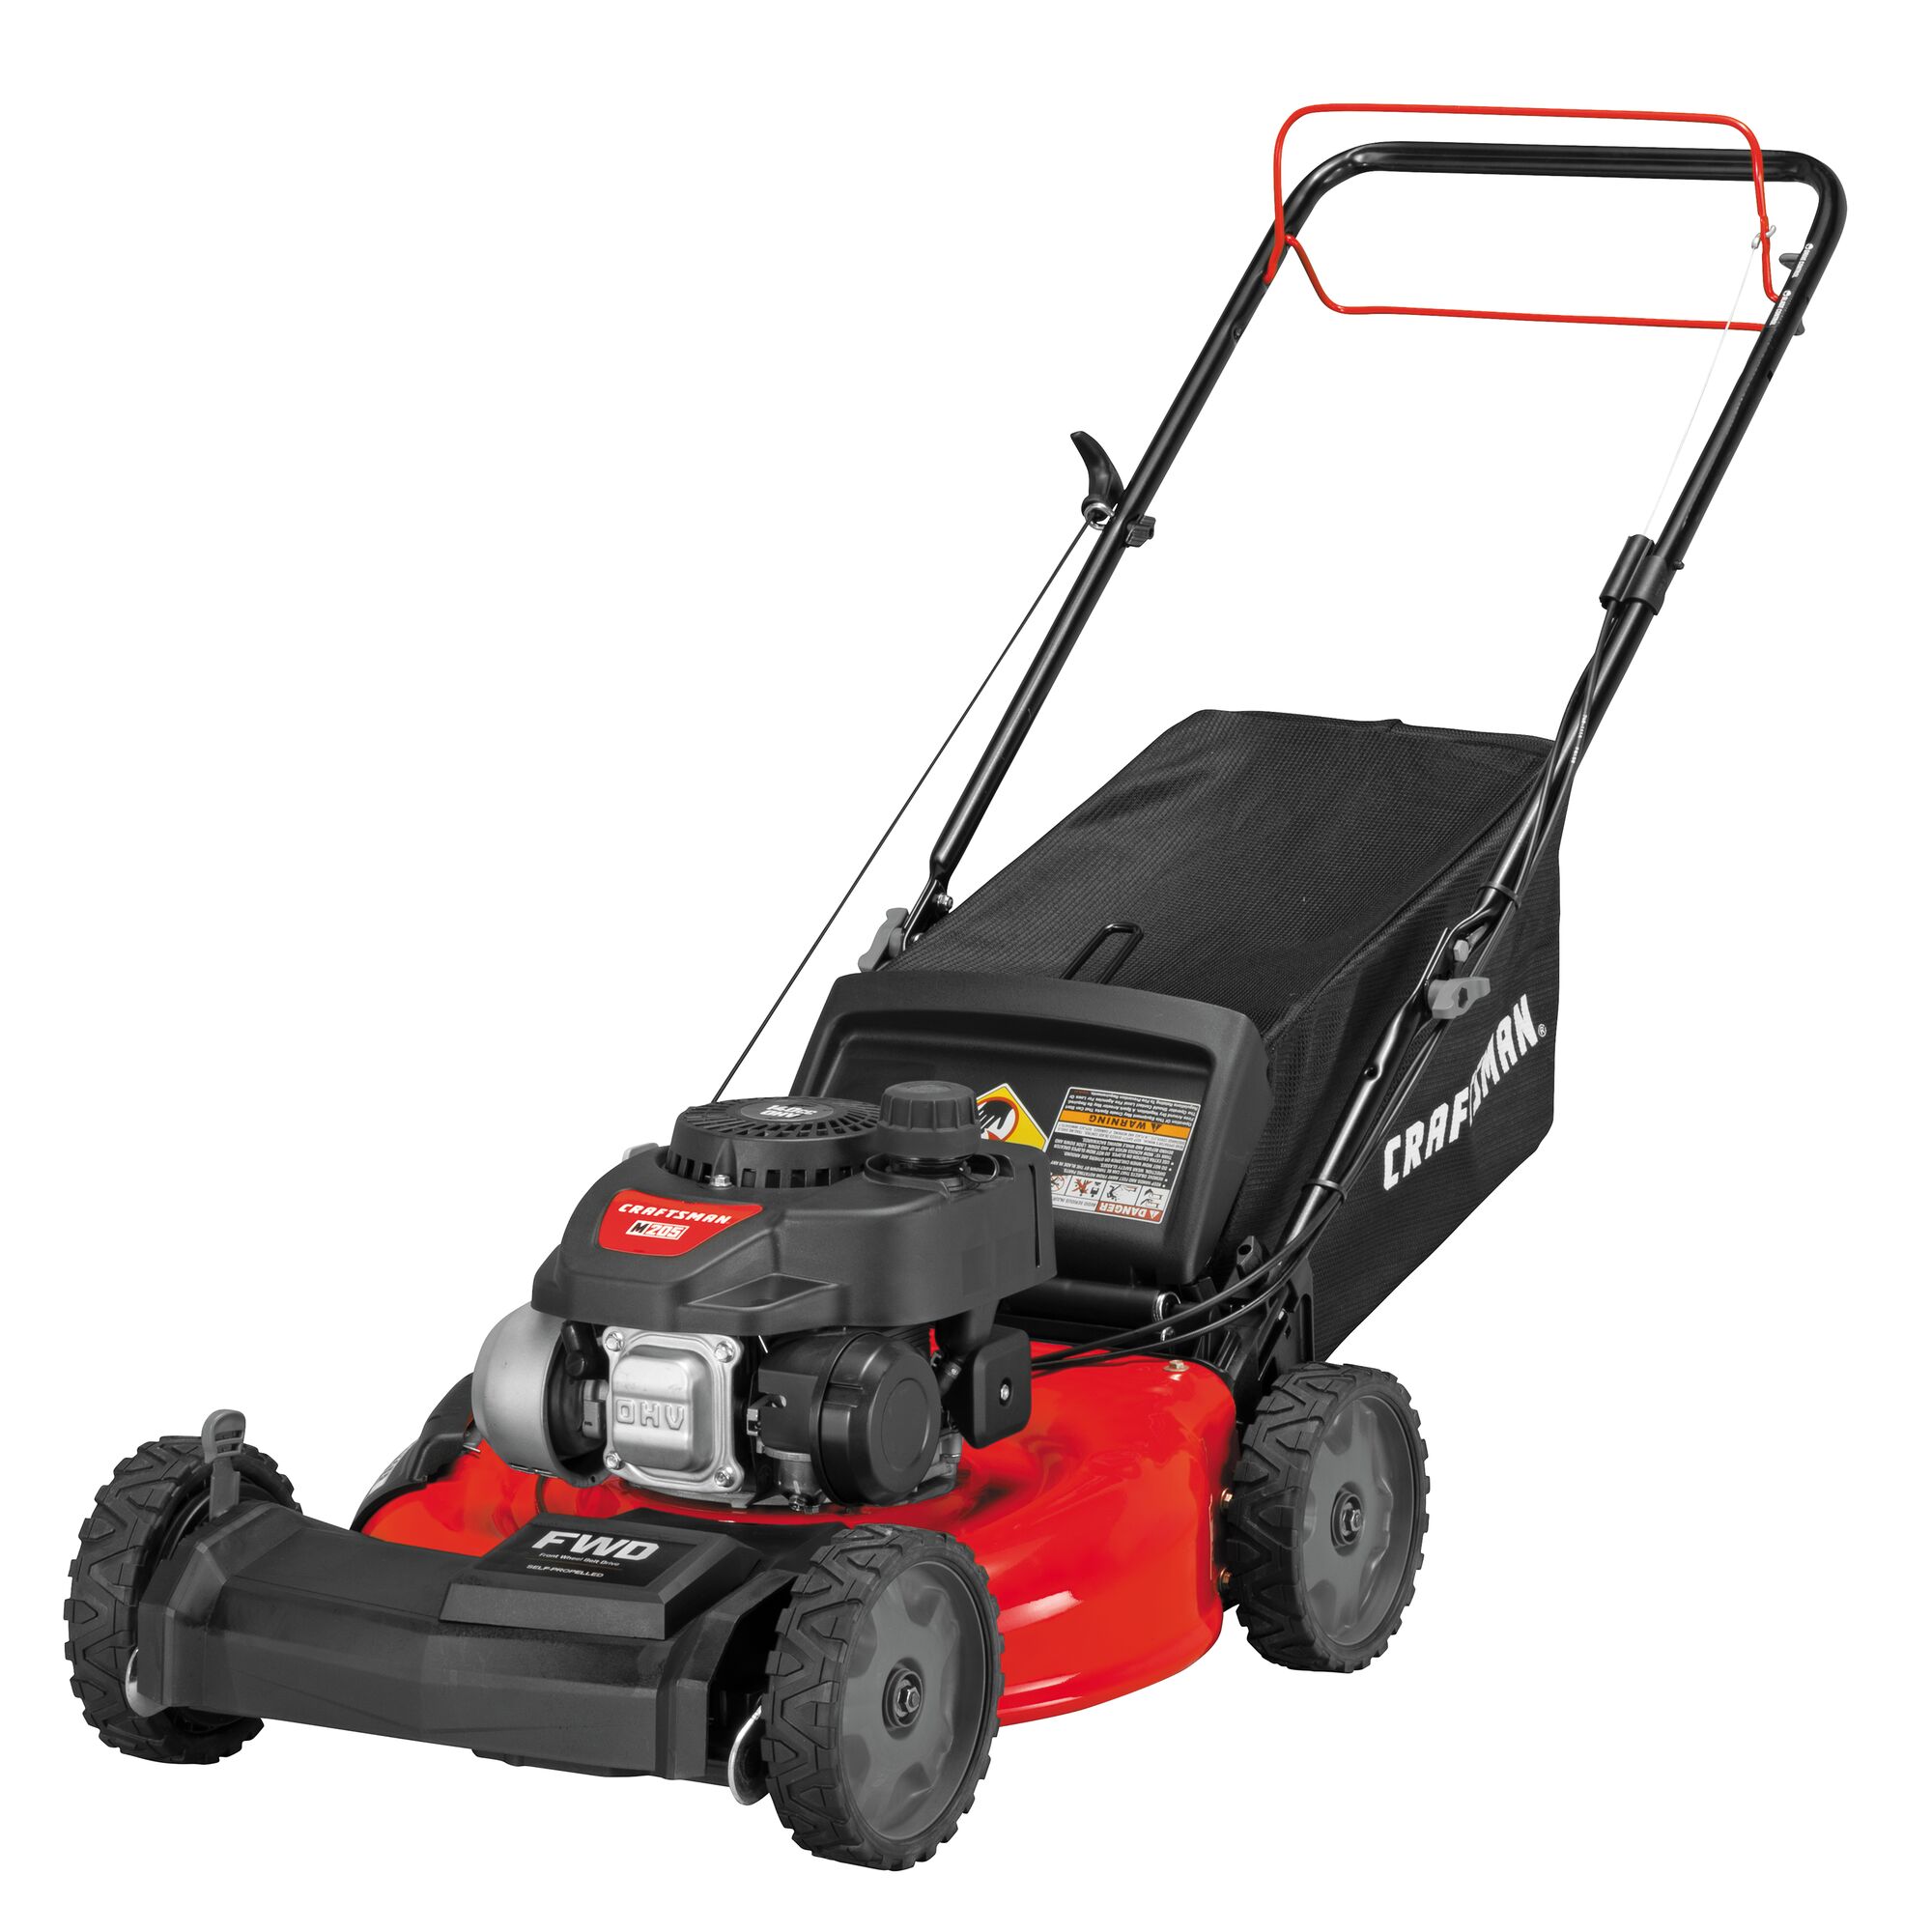 21 inch front wheel drive self propelled lawn mower.